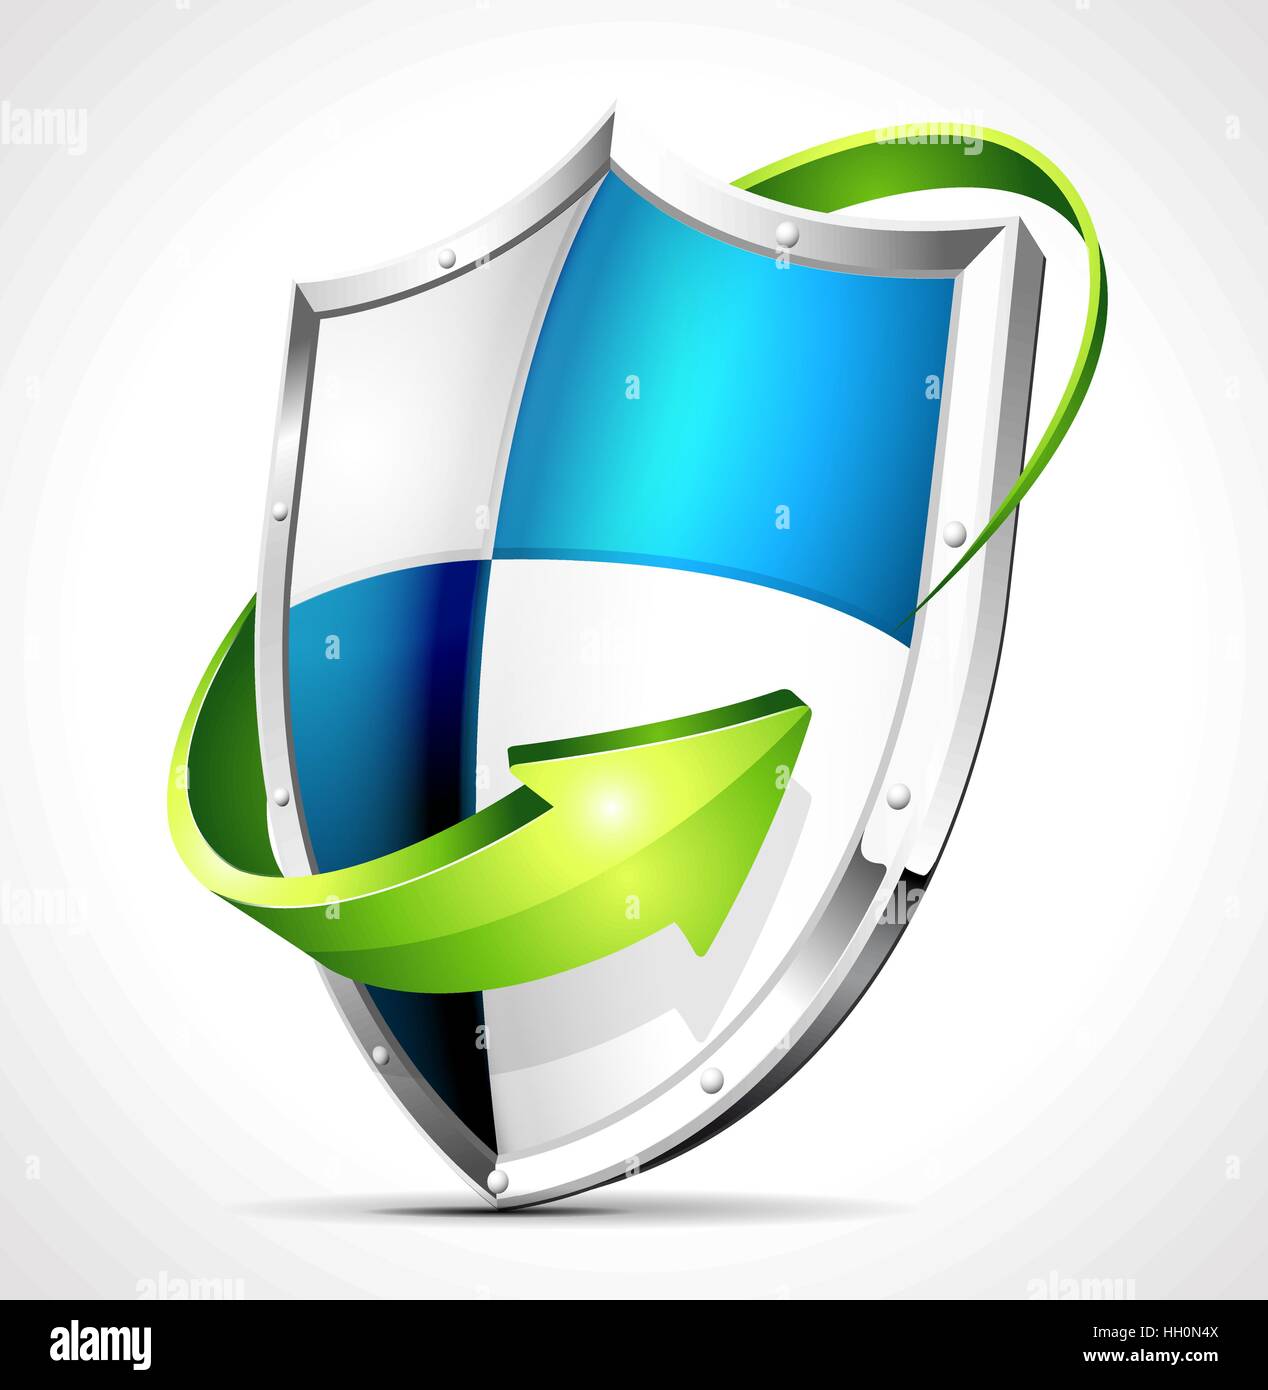 Protection shield - security concept Stock Vector